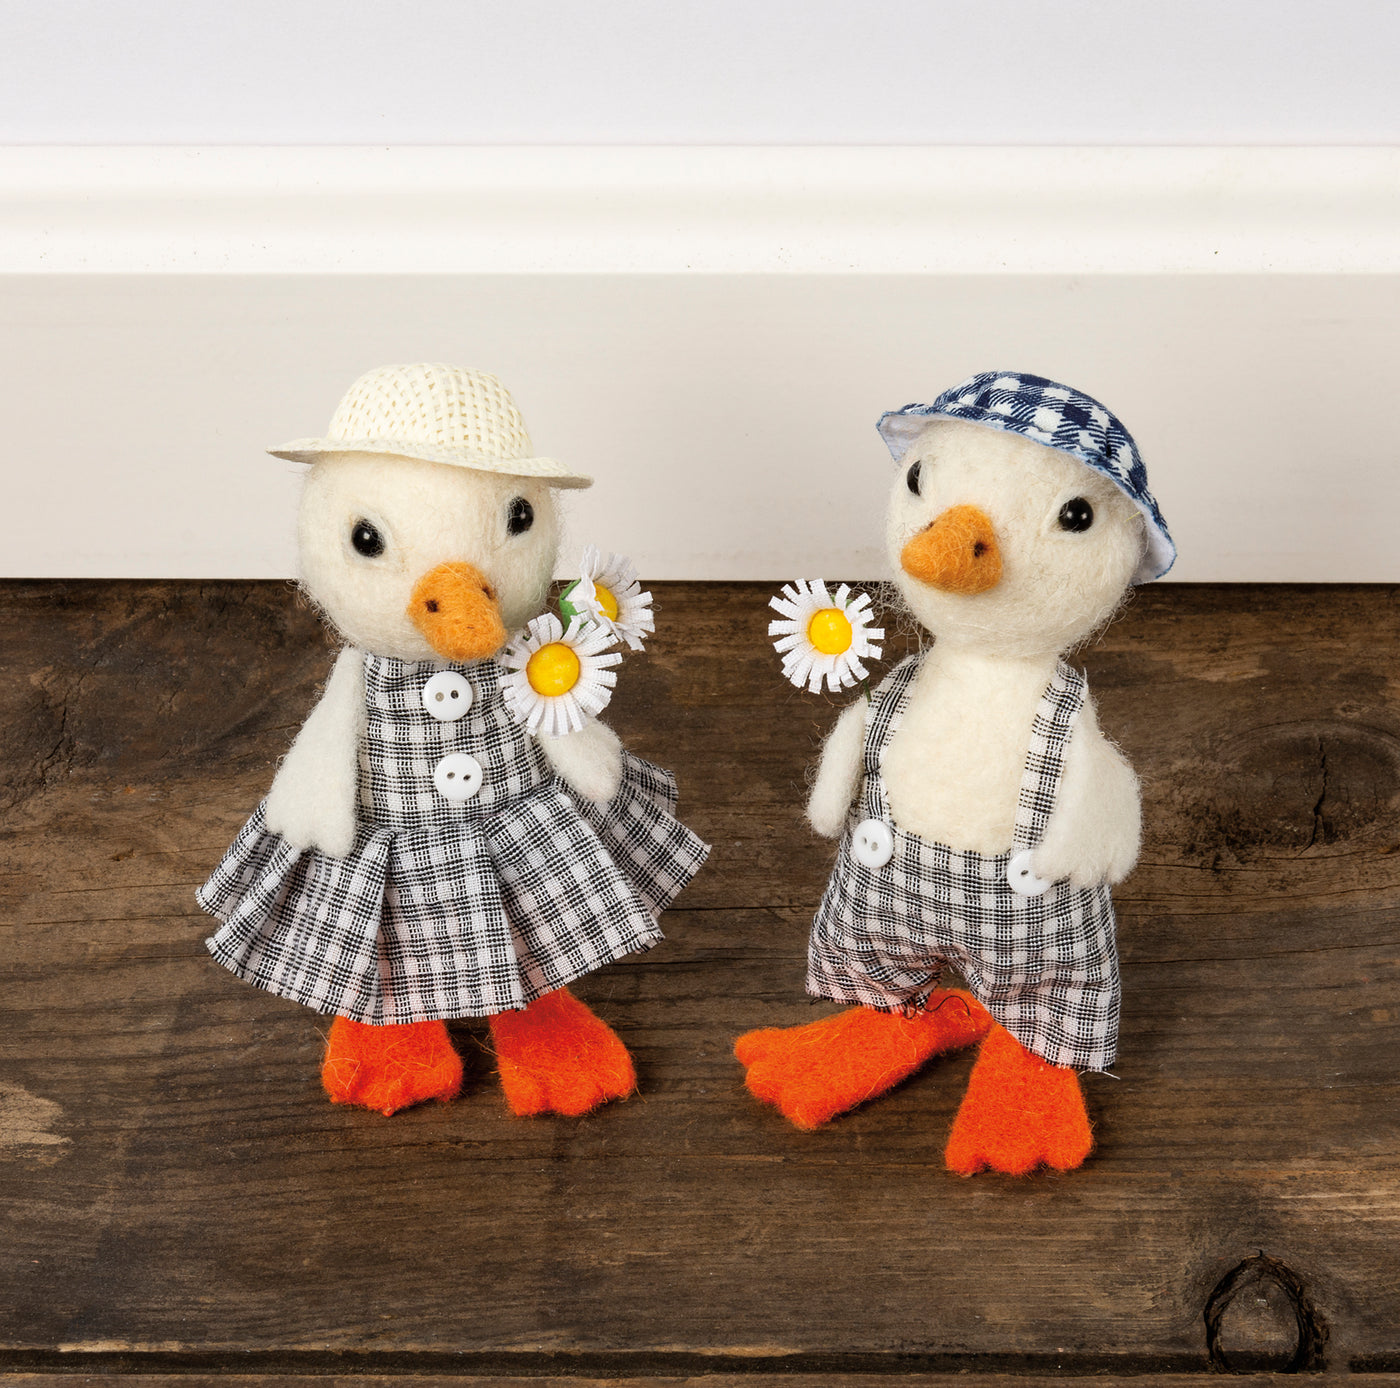 Mr & Mrs Gingham Duck with Daisies Figures